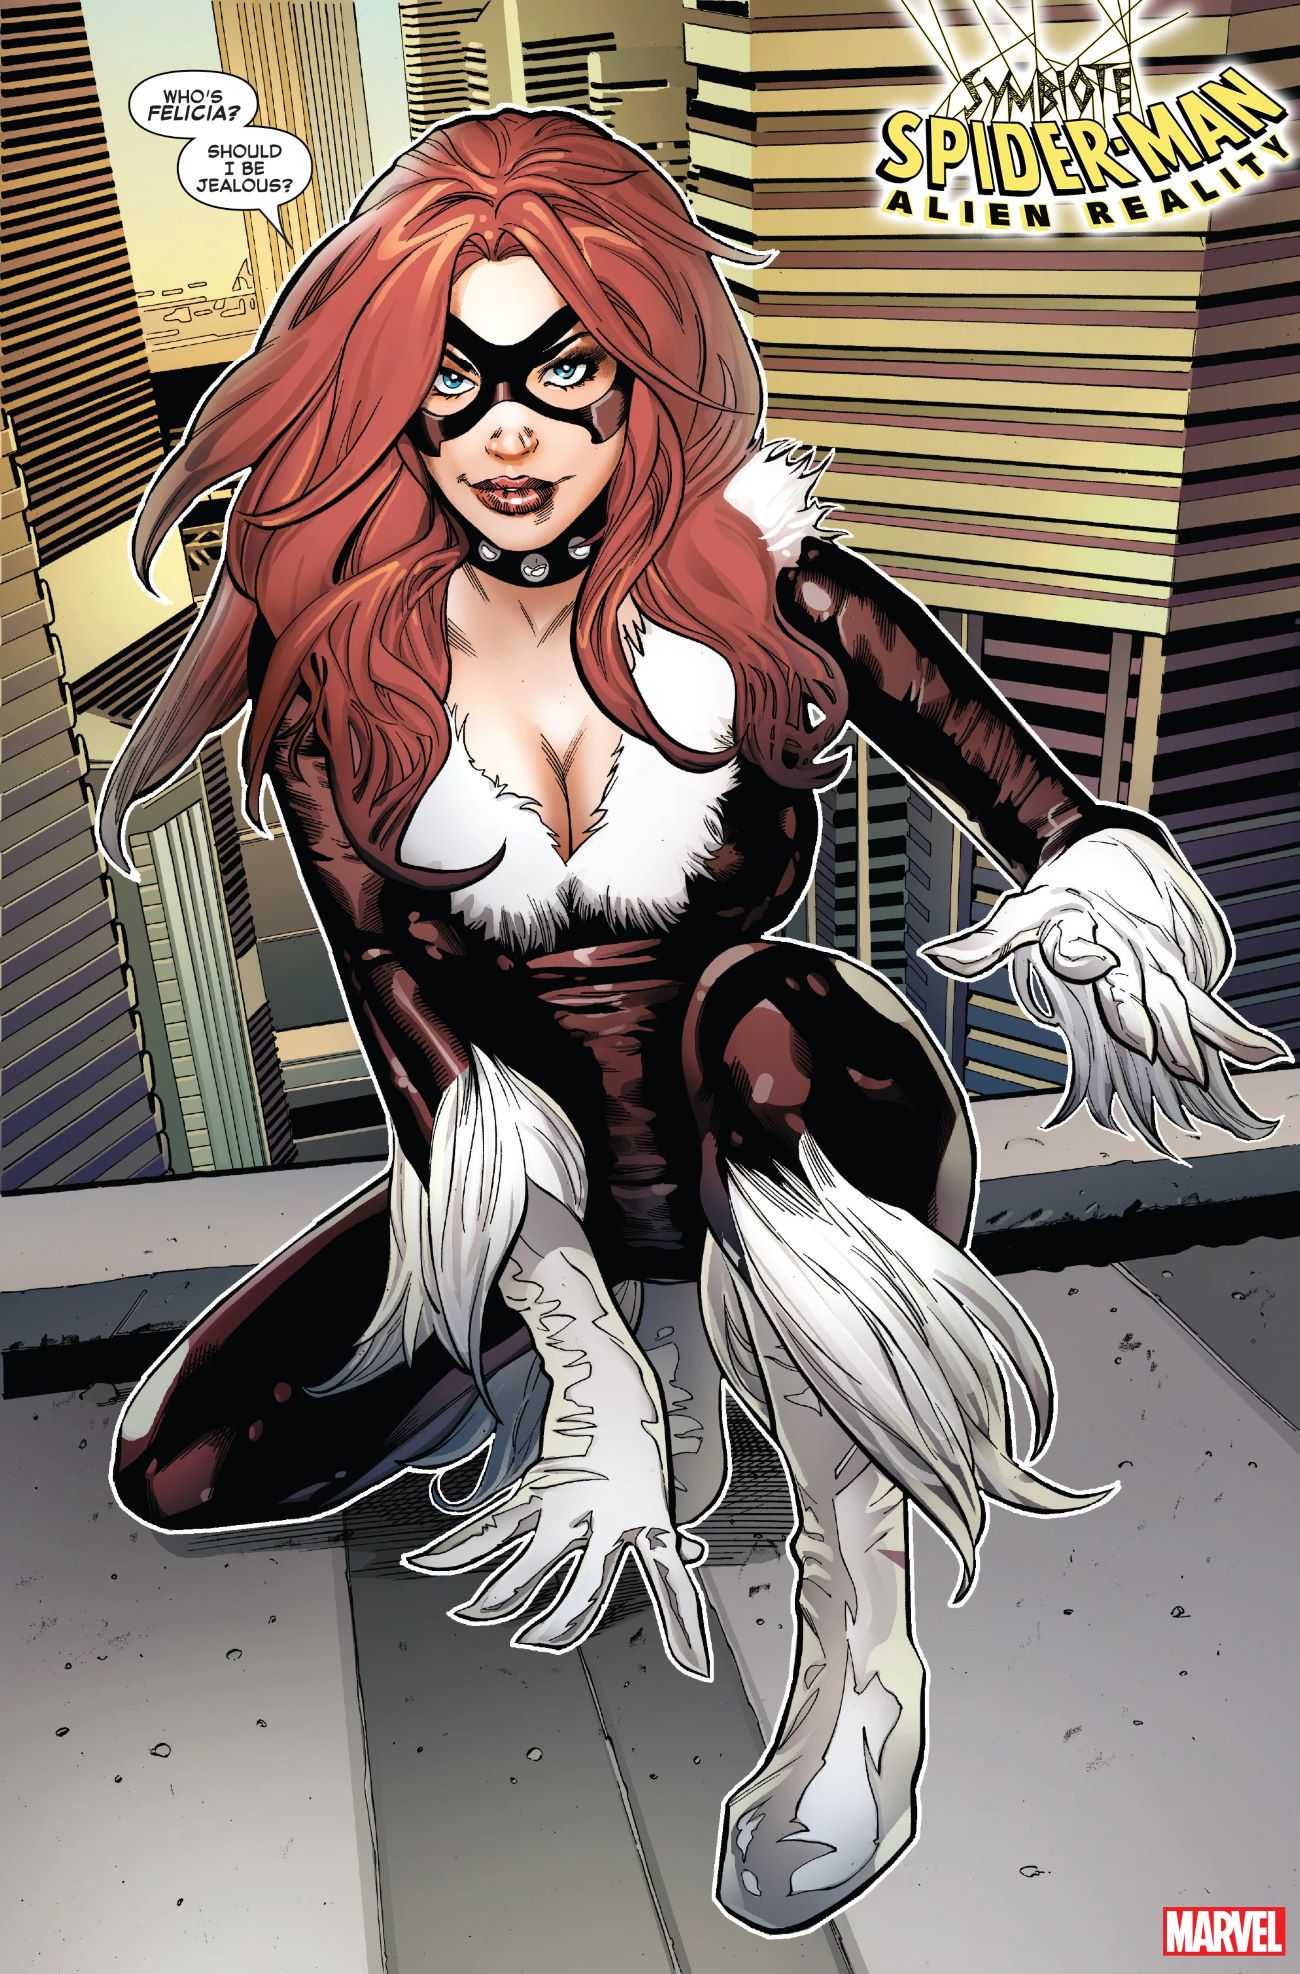 New Black Cat in Symbiote Spider-Man Alien Reality